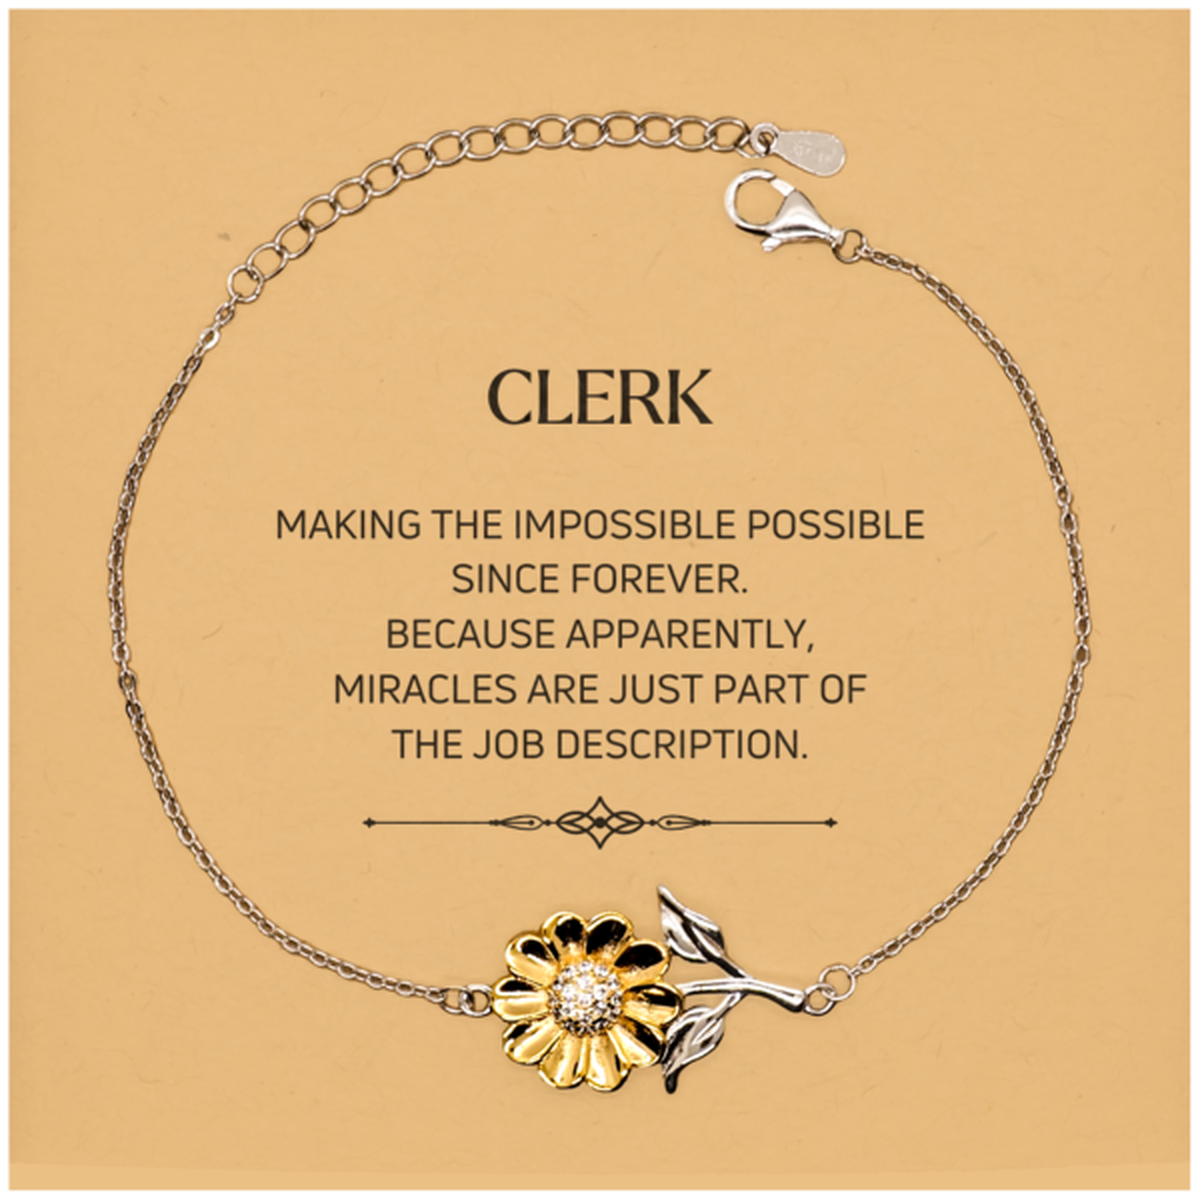 Funny Clerk Gifts, Miracles are just part of the job description, Inspirational Birthday Christmas Sunflower Bracelet For Clerk, Men, Women, Coworkers, Friends, Boss